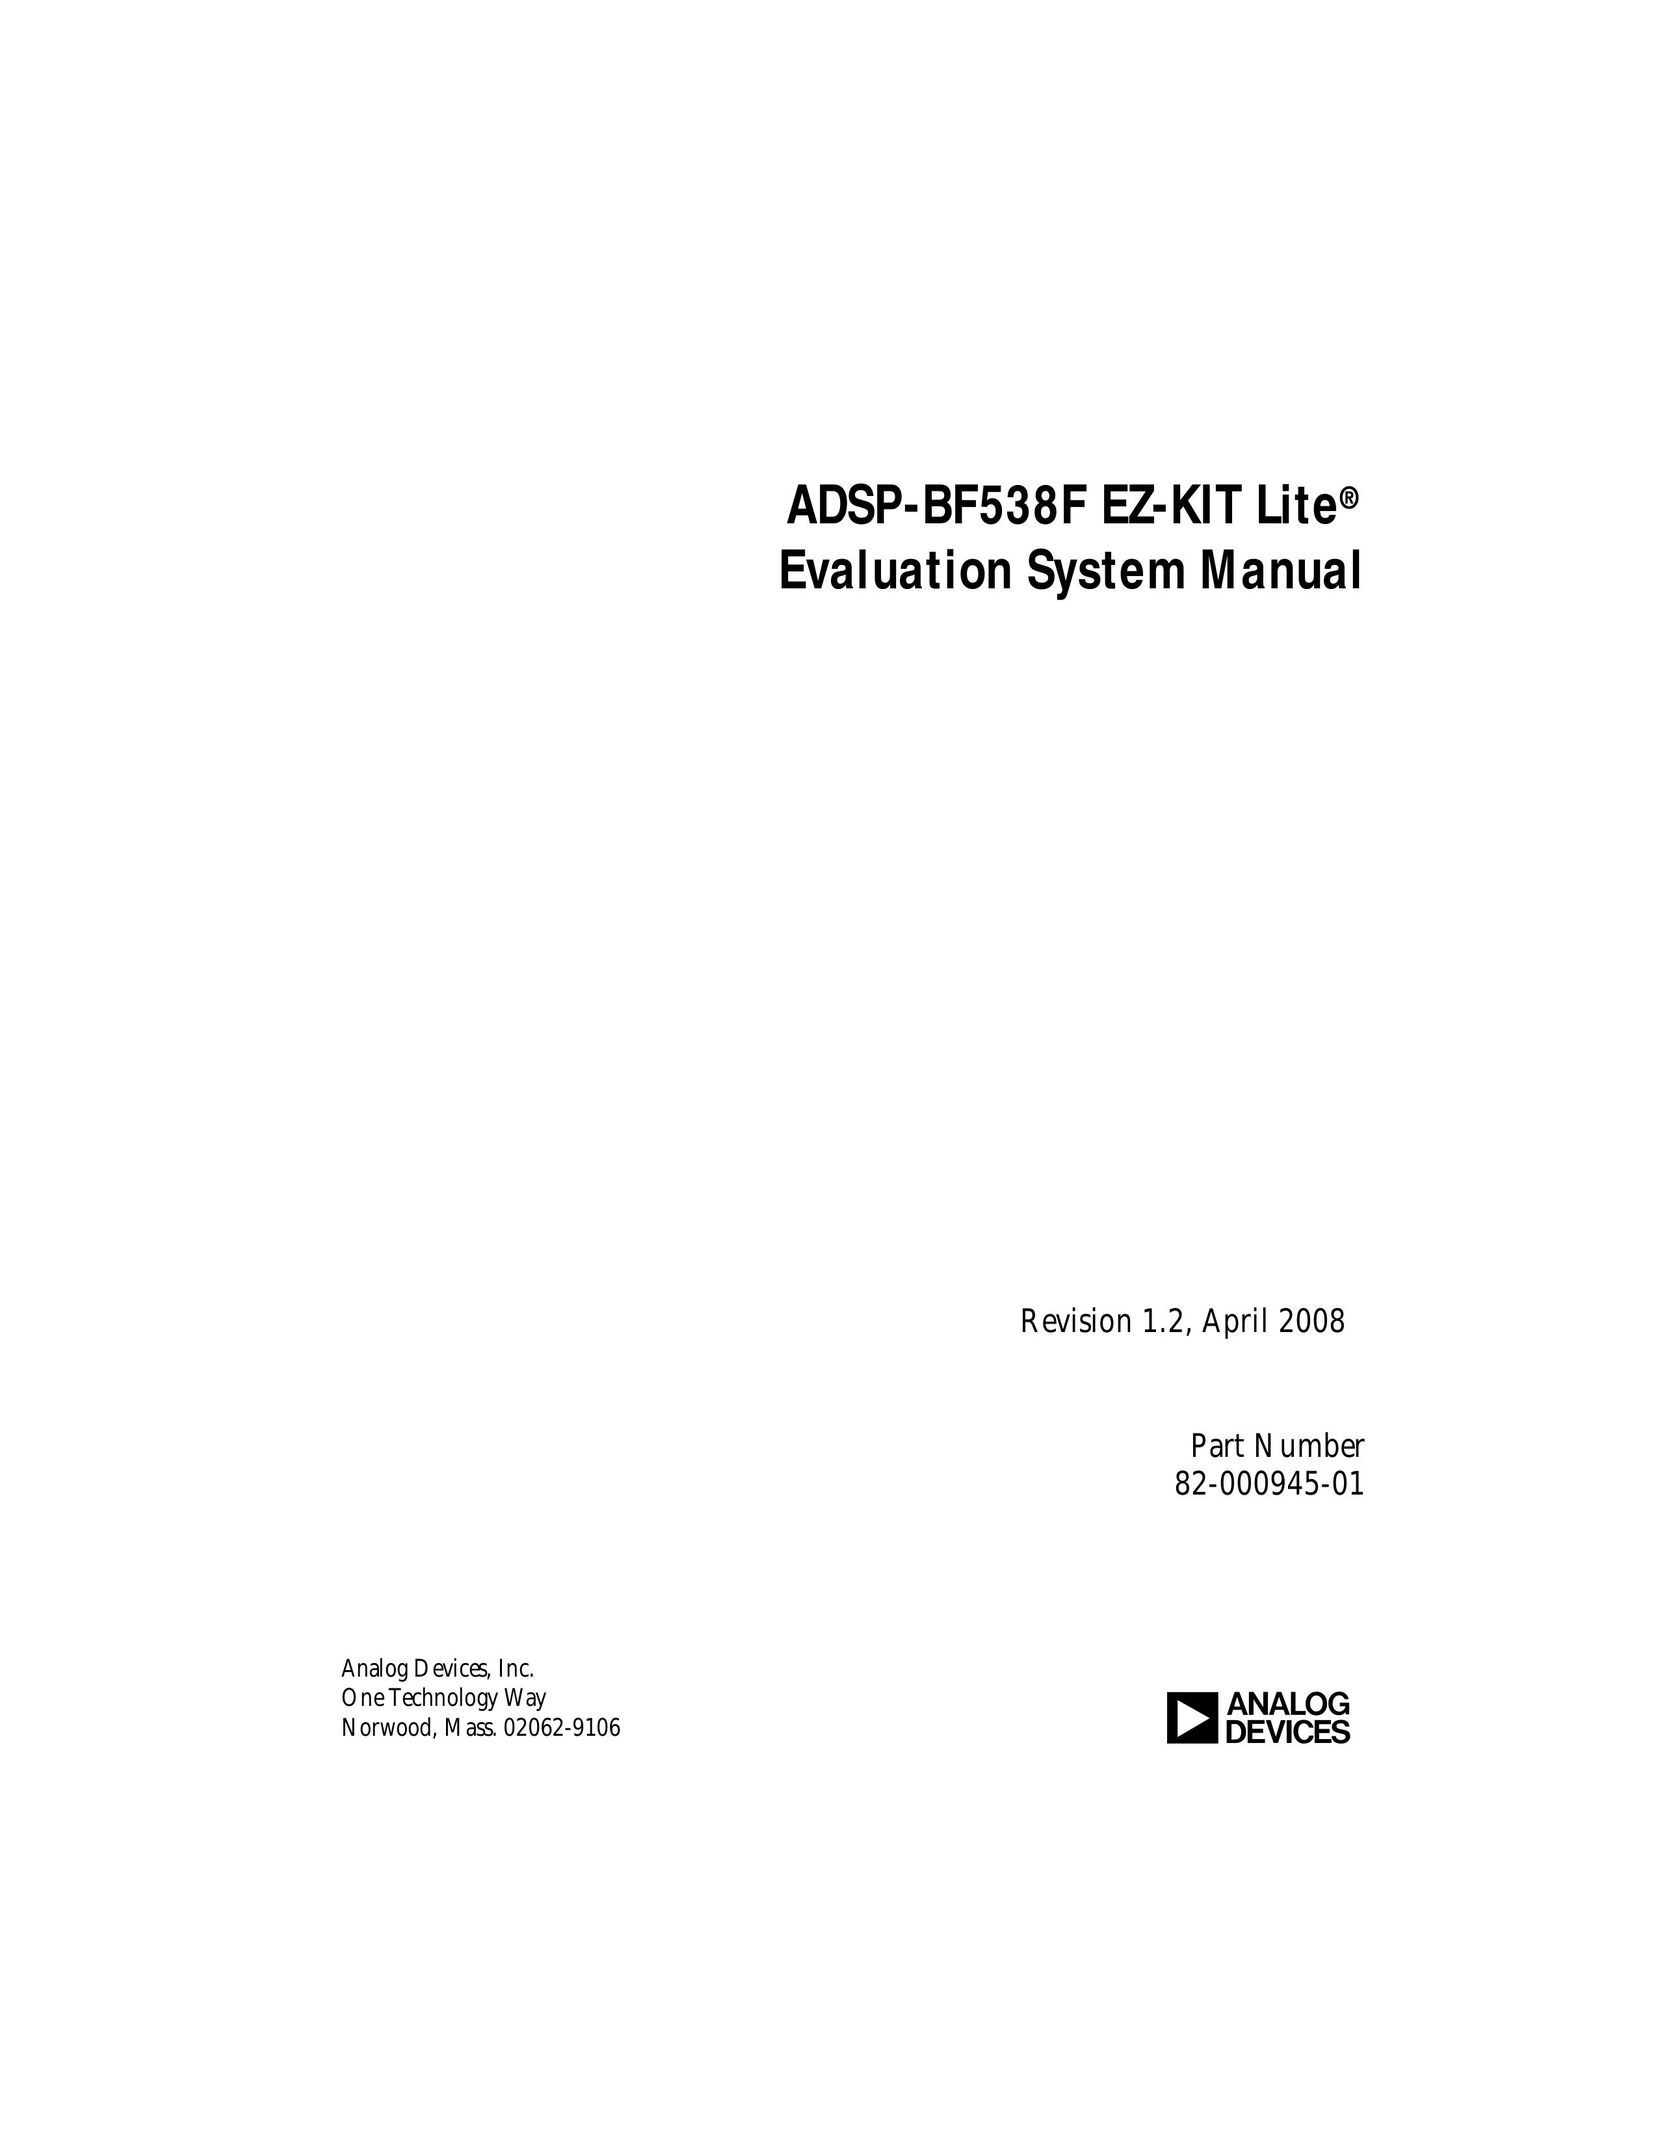 Analog Devices ADSP-BF538F Computer Hardware User Manual